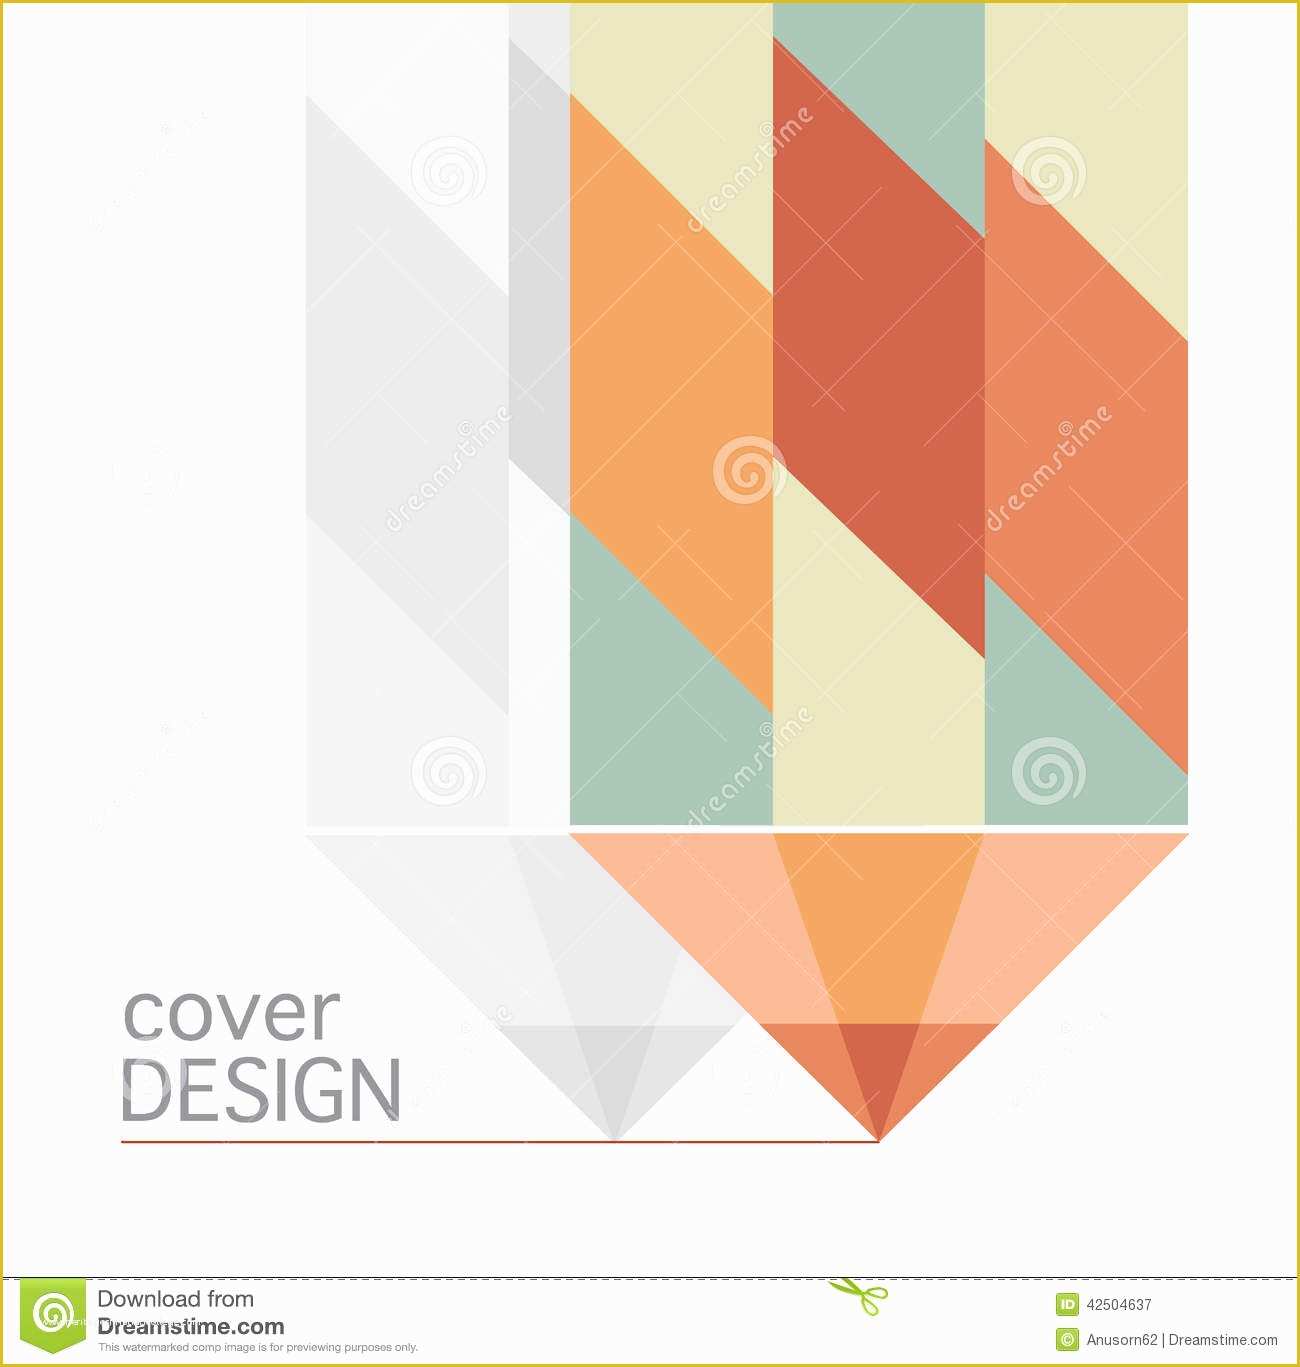 Free Book Cover Design Templates Of 28 Of Cover Design Template Drawn Program